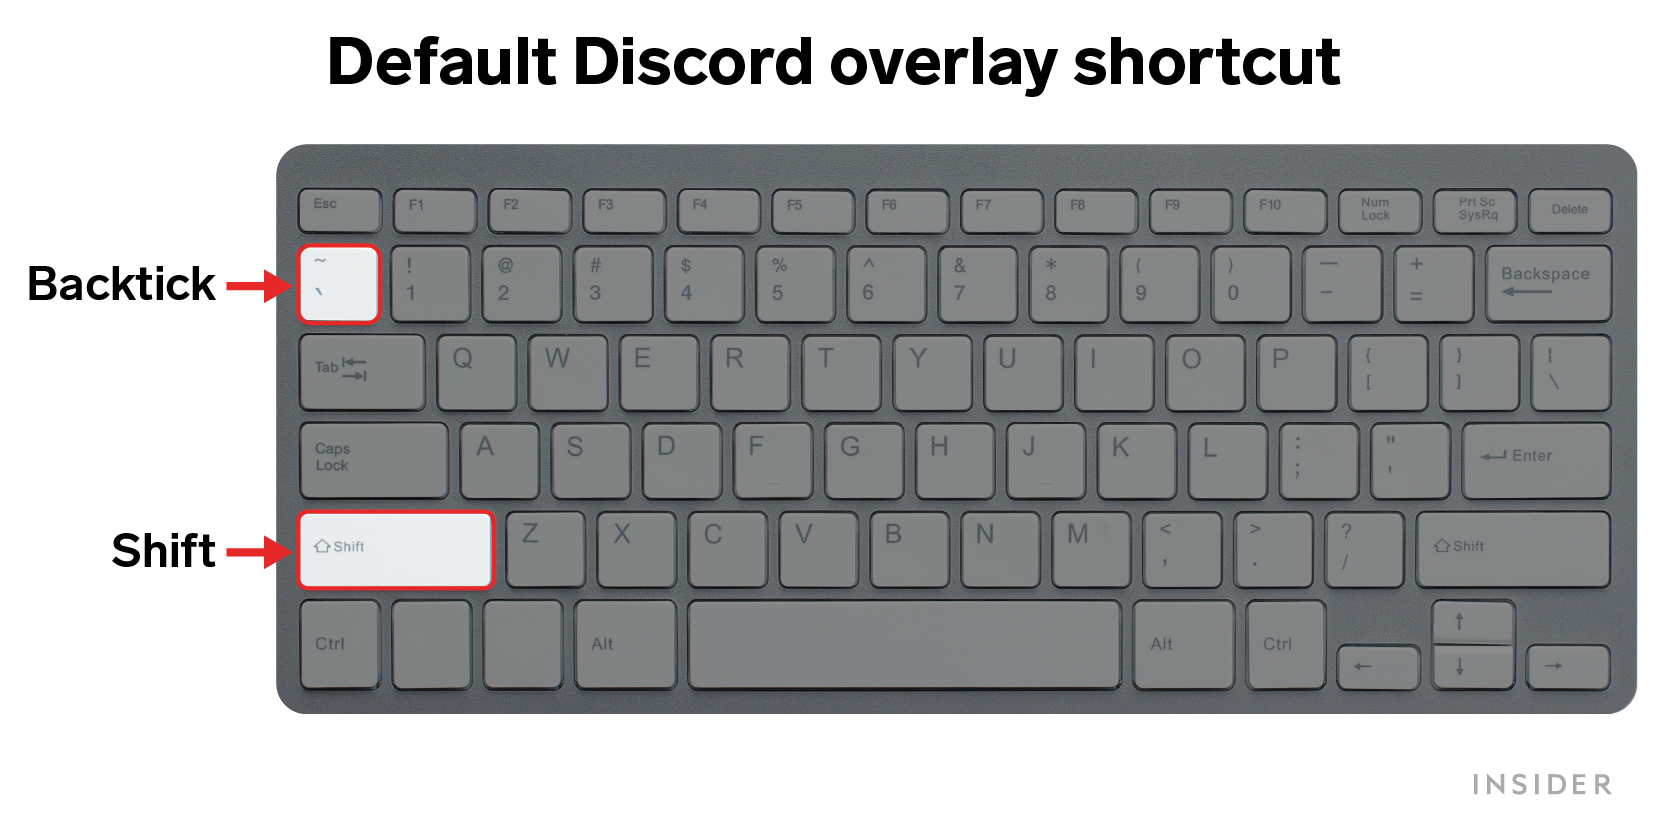 A graphic showing the default discord overlay shortcut, with backshift and shift keys highlighted.